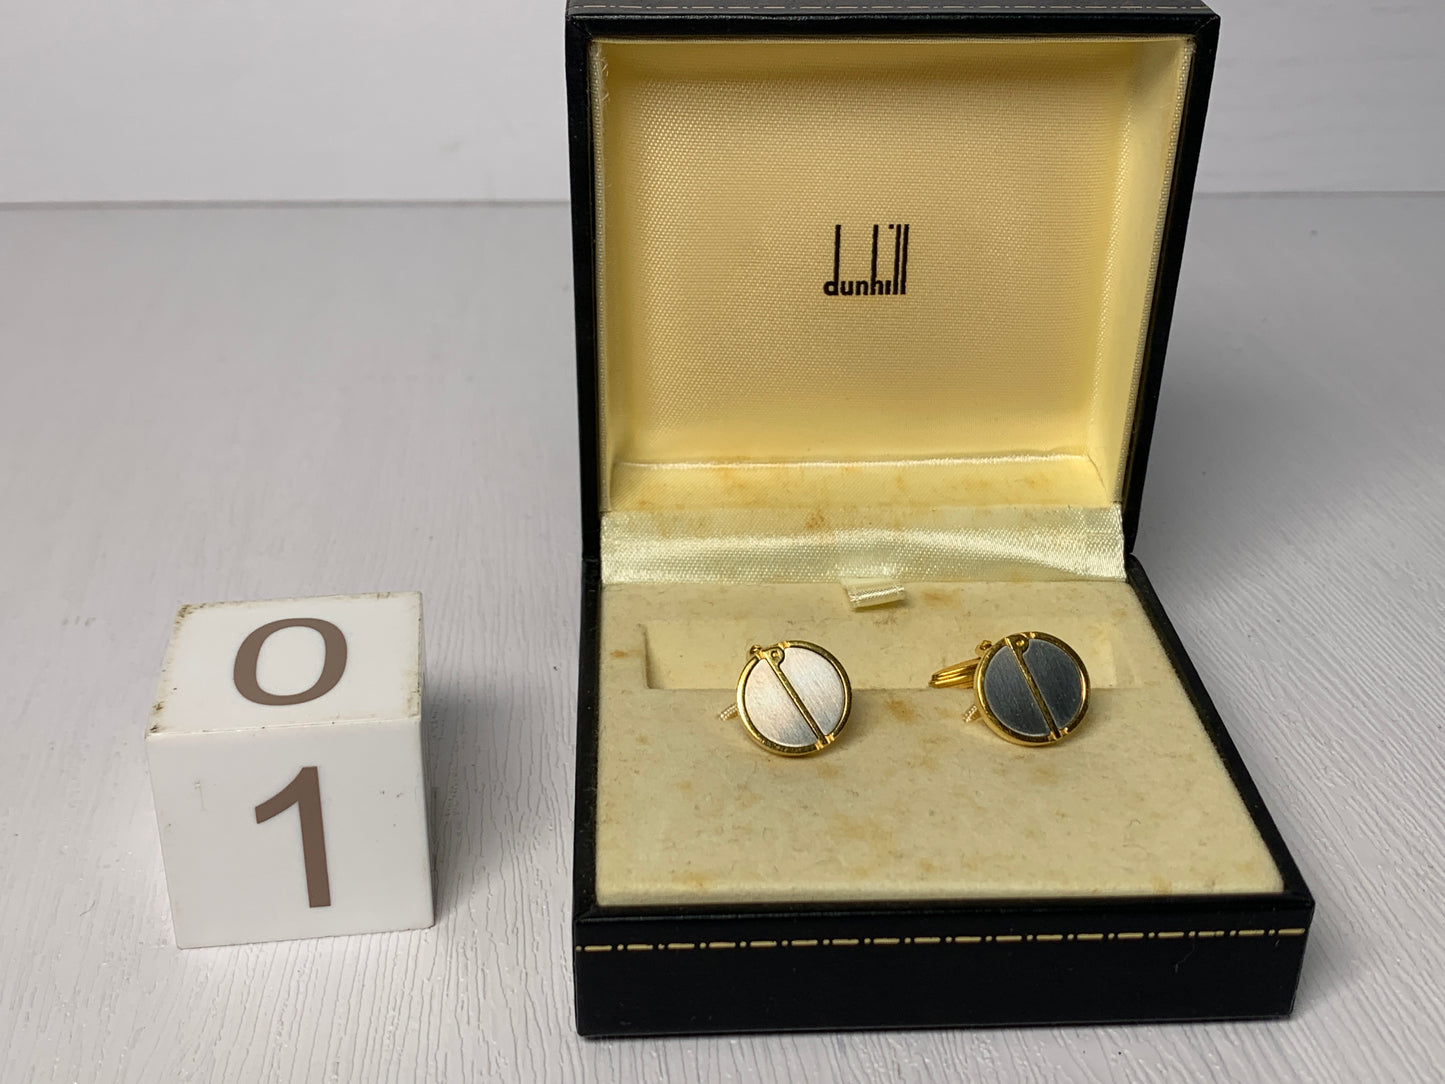 Vintage Tie clip dunhill  cufflinks with box  - 3MAR